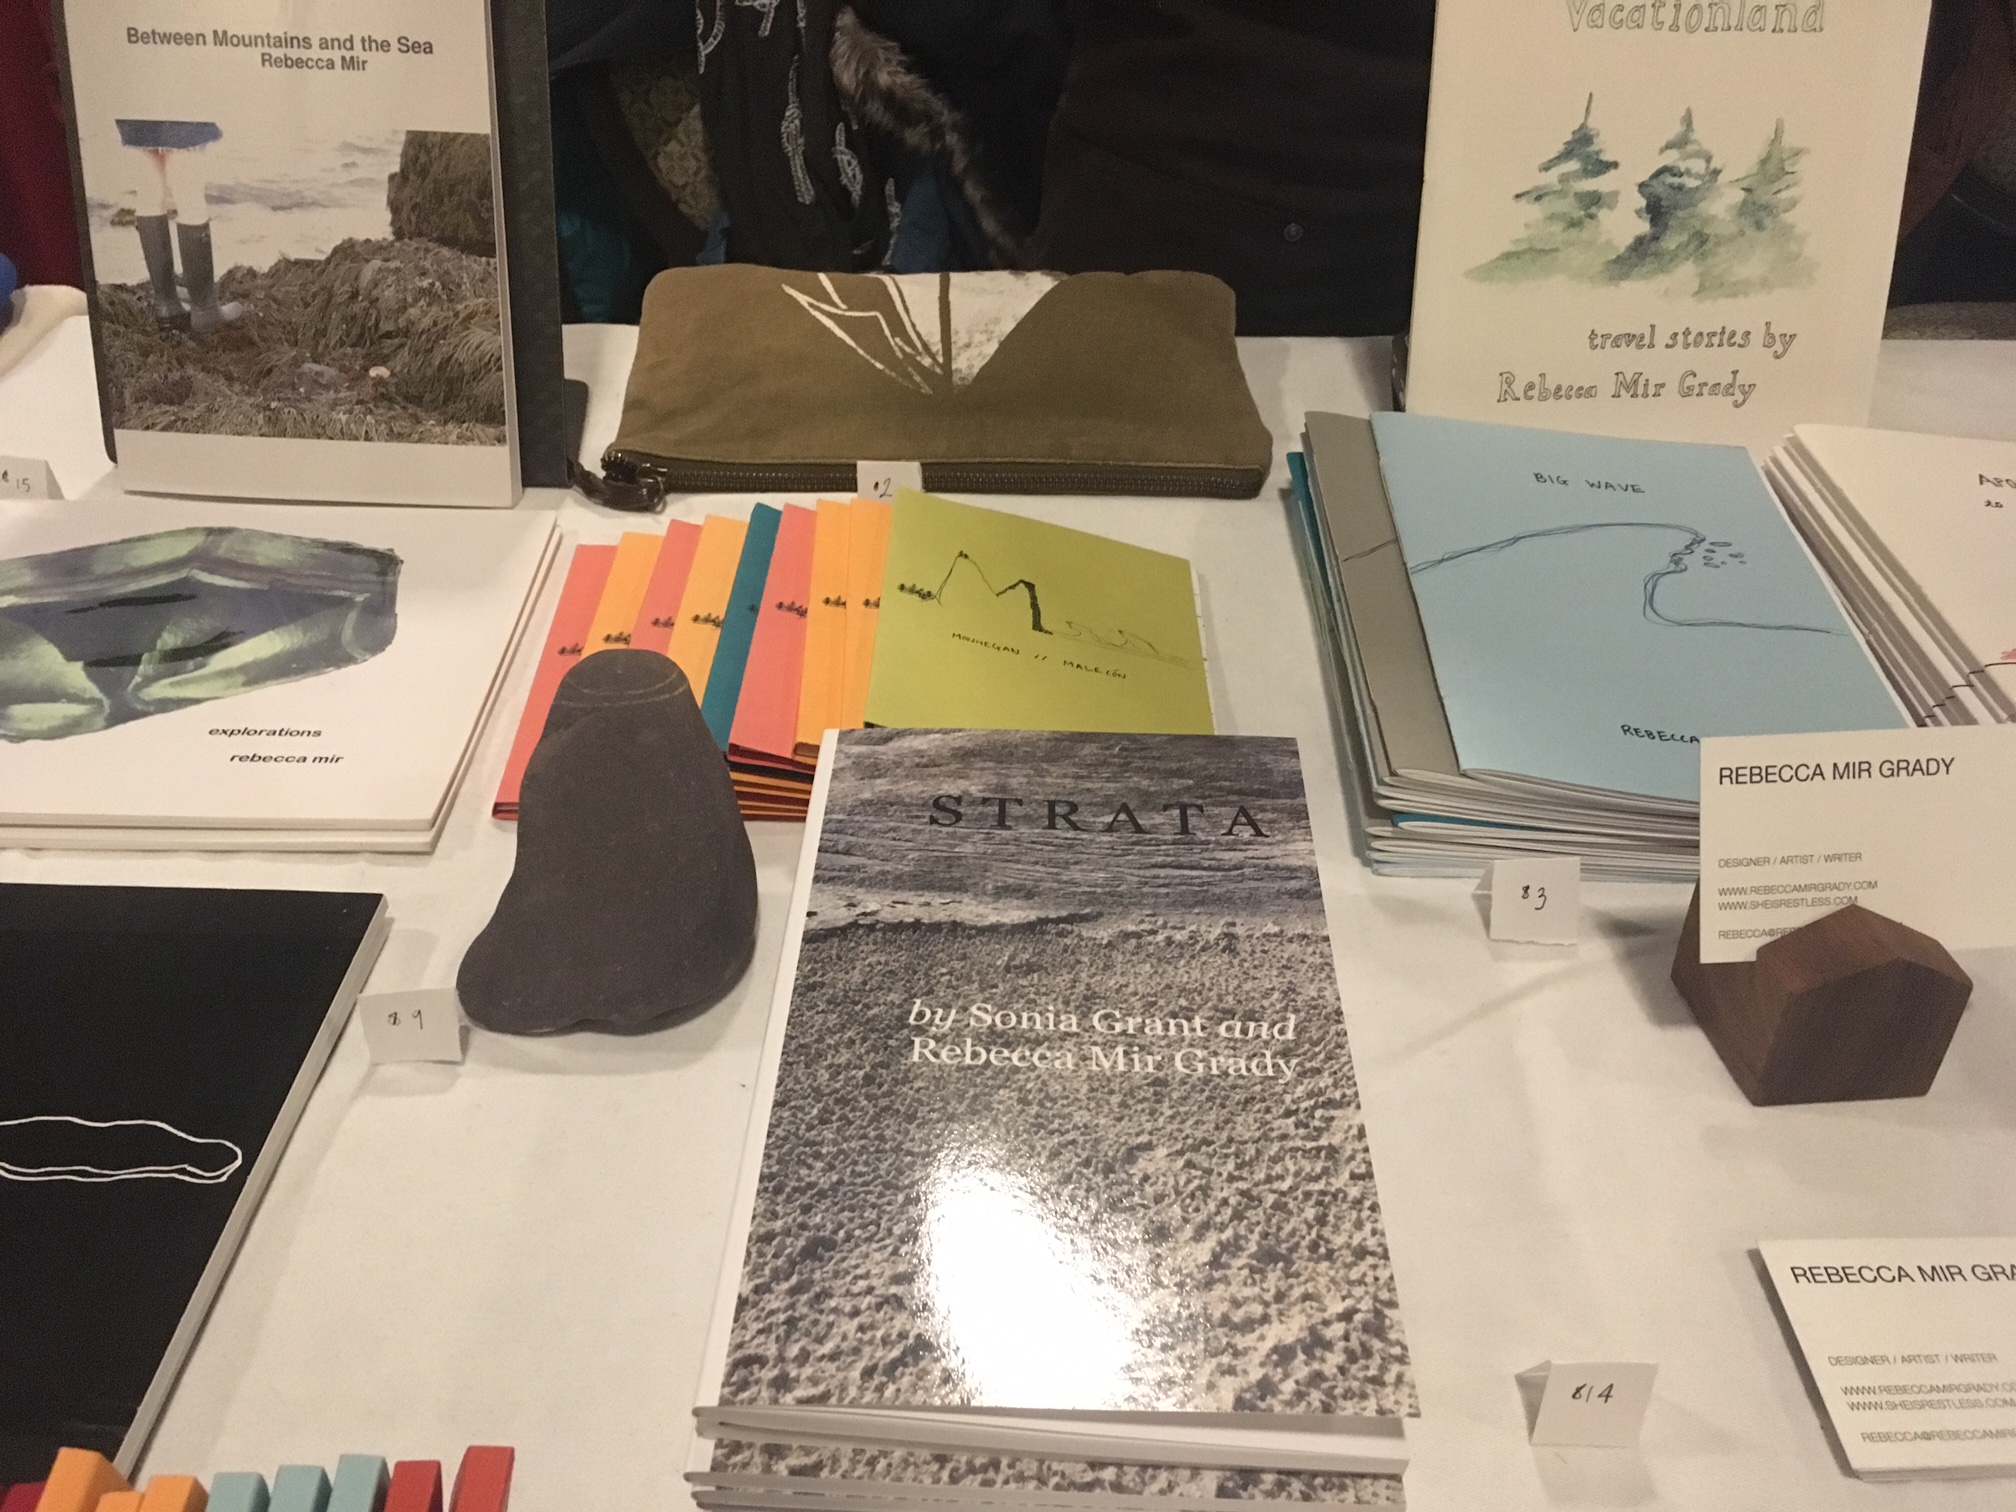 Items from Rebecca Mir Grady's table at the Chicago Art Book Fair.